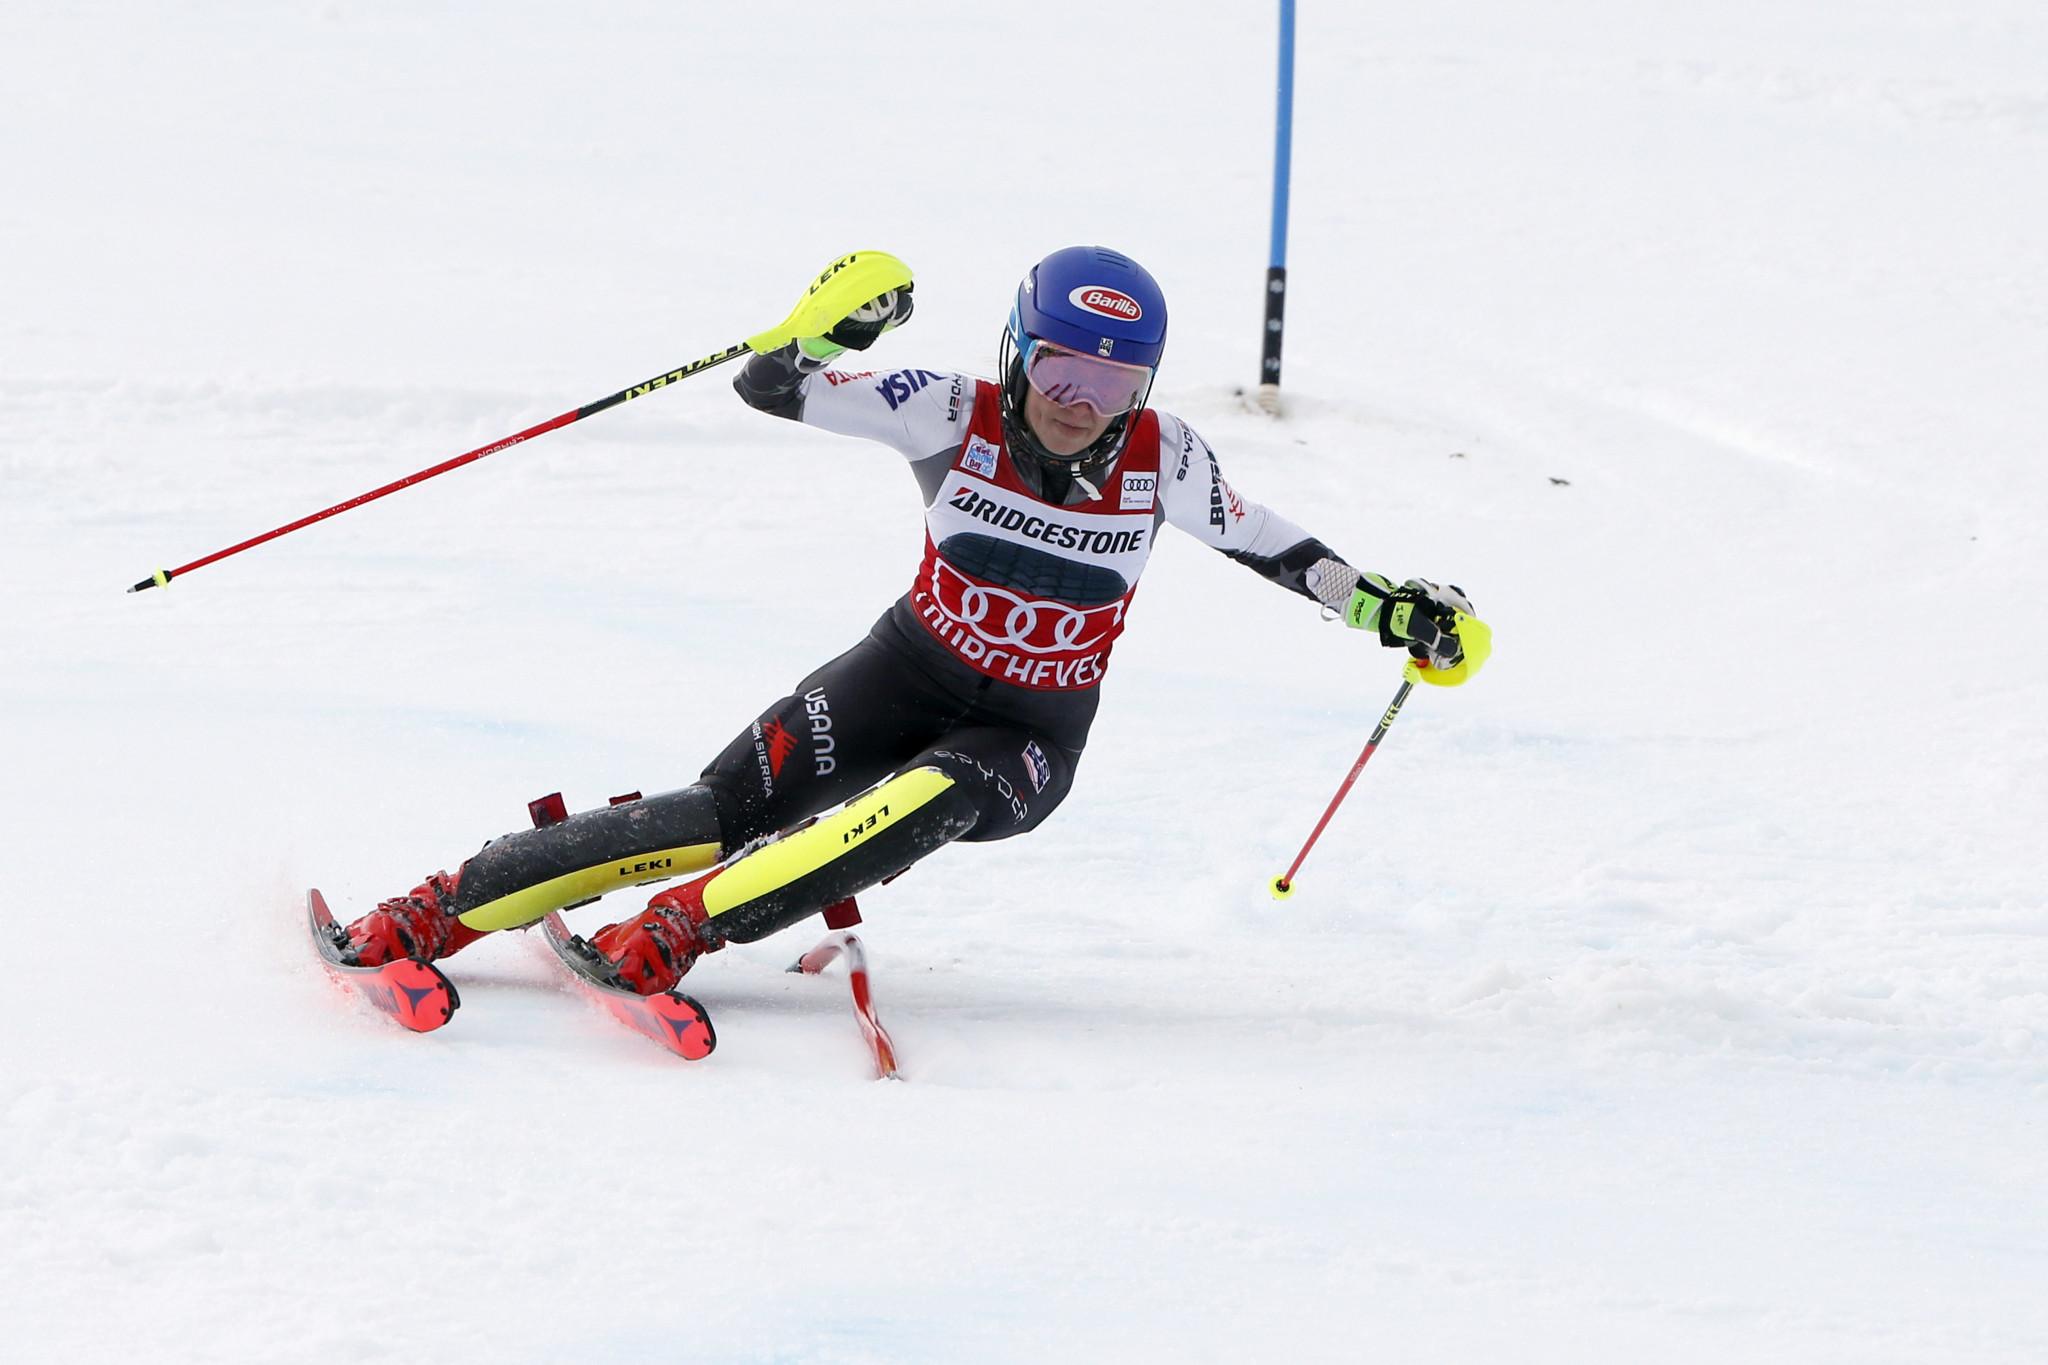 Mikaela Shiffrin will look to continue her unbeatable form in Semmering ©Getty Images